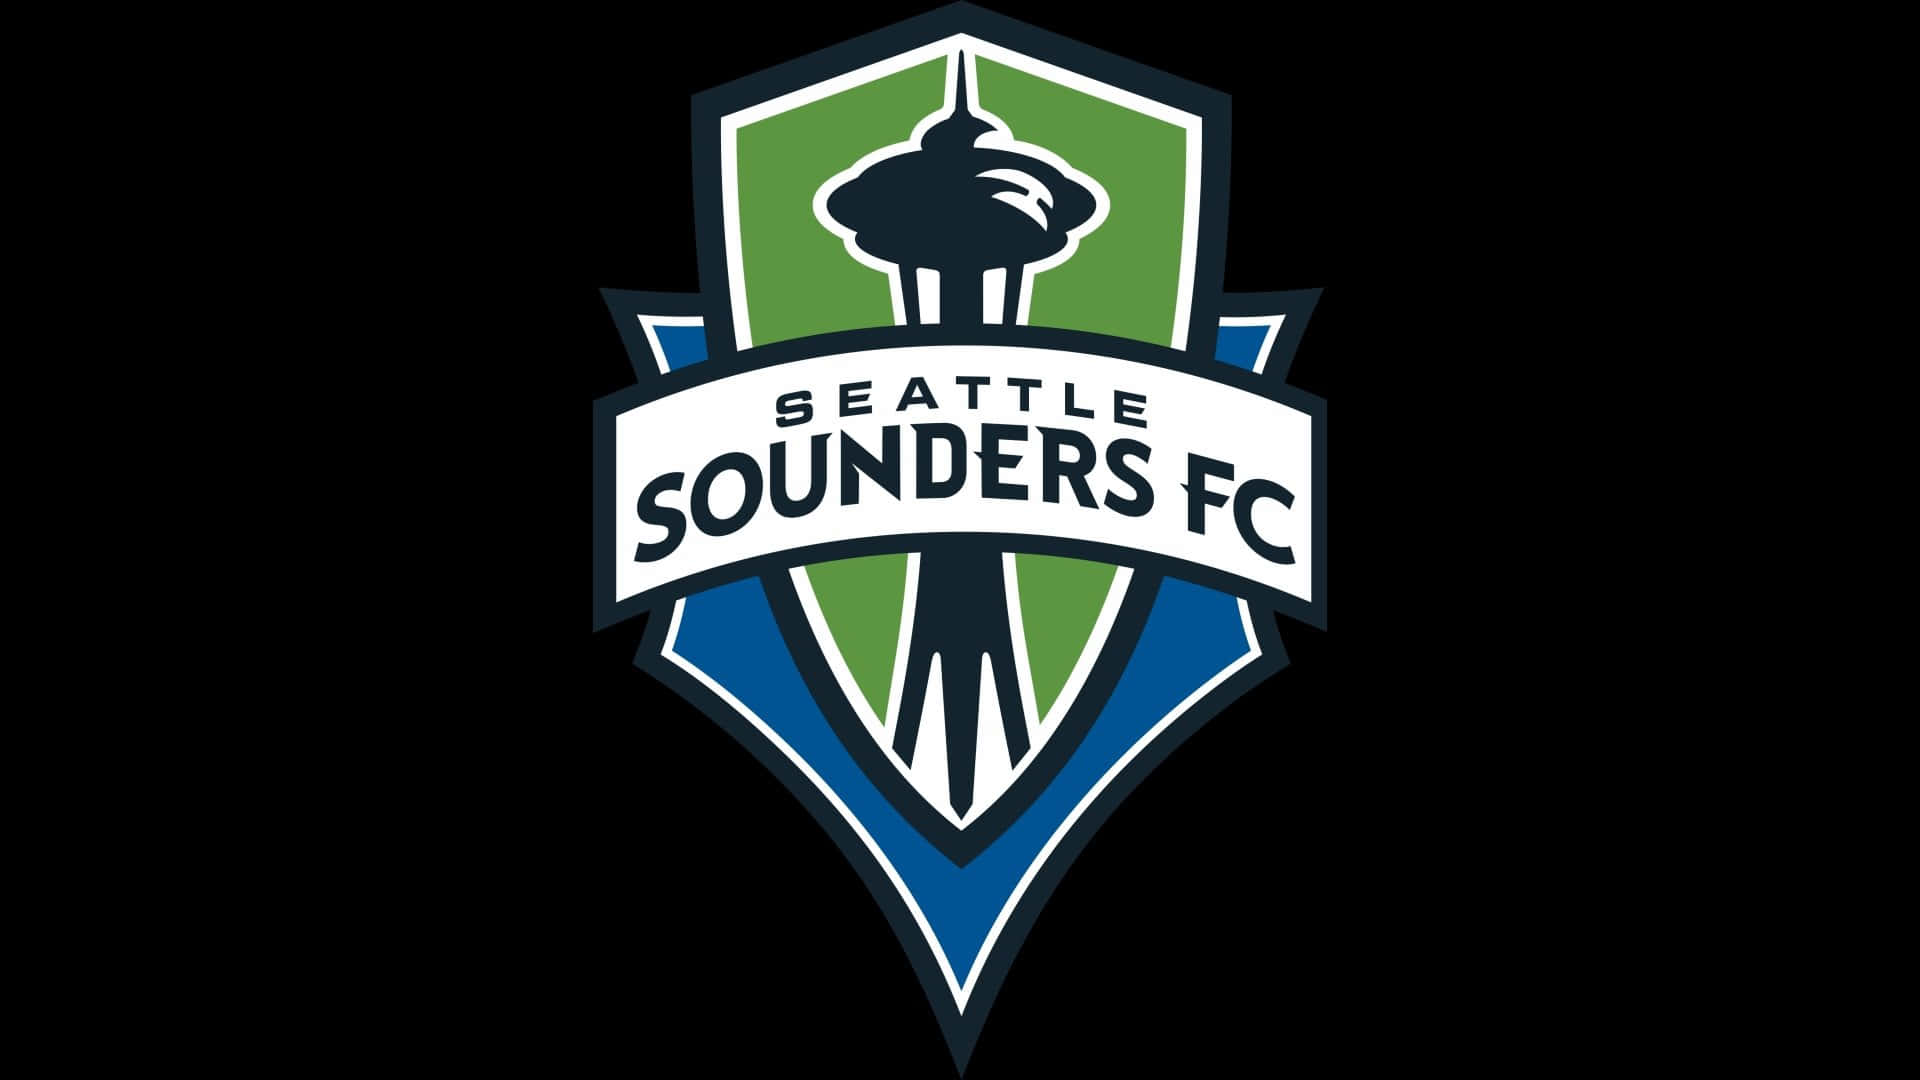 Seattle Sounders FC Primary Team Logo Wallpaper